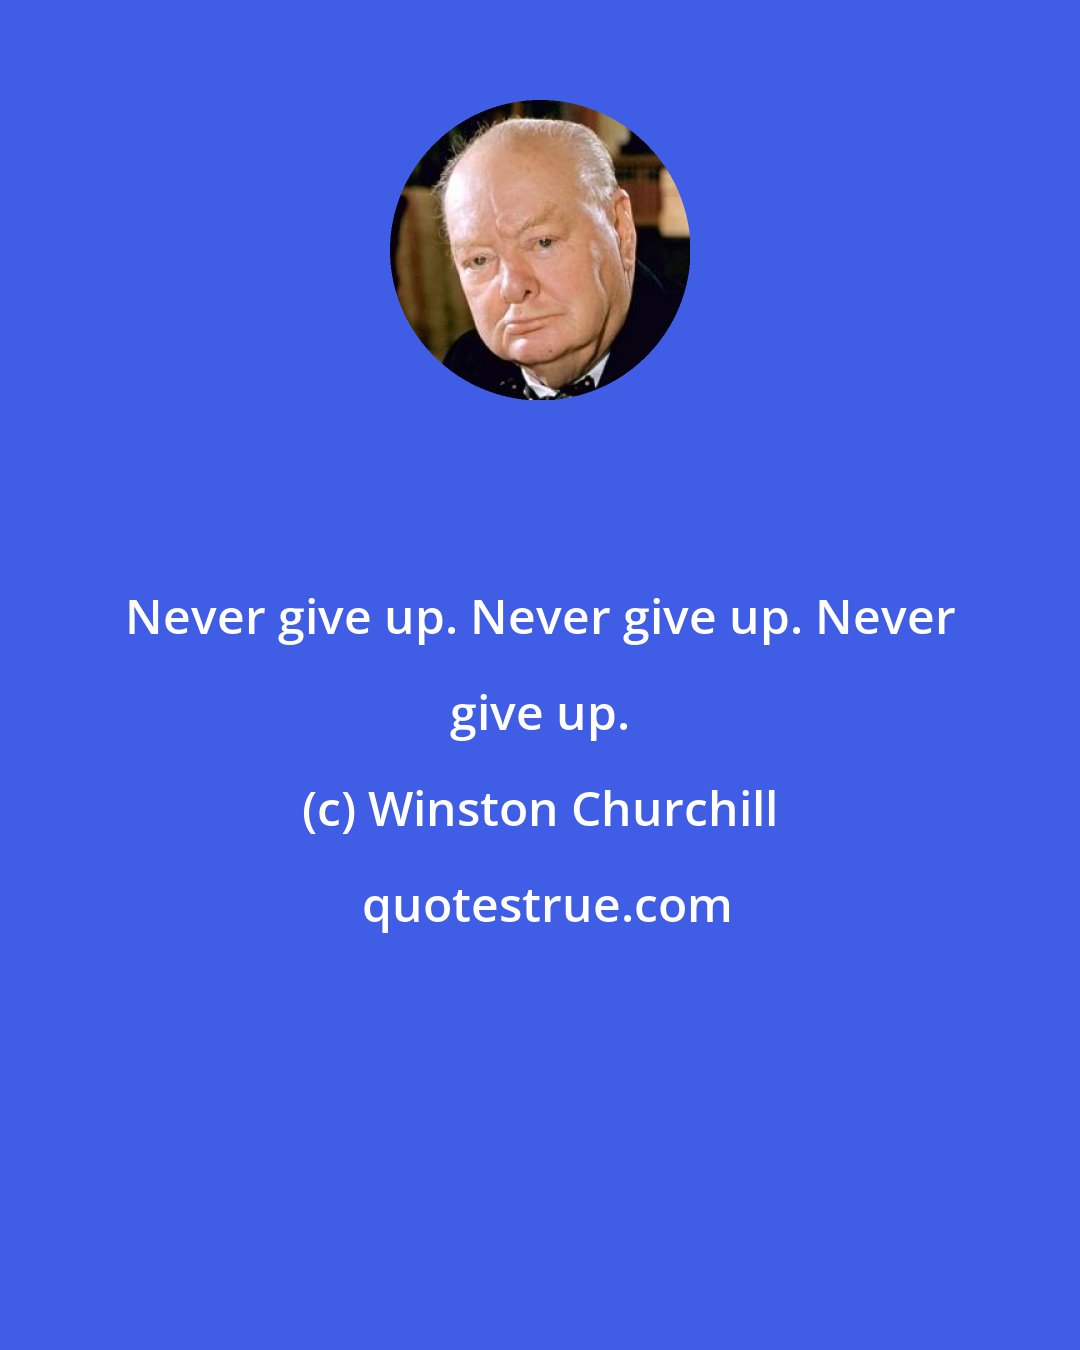 Winston Churchill: Never give up. Never give up. Never give up.